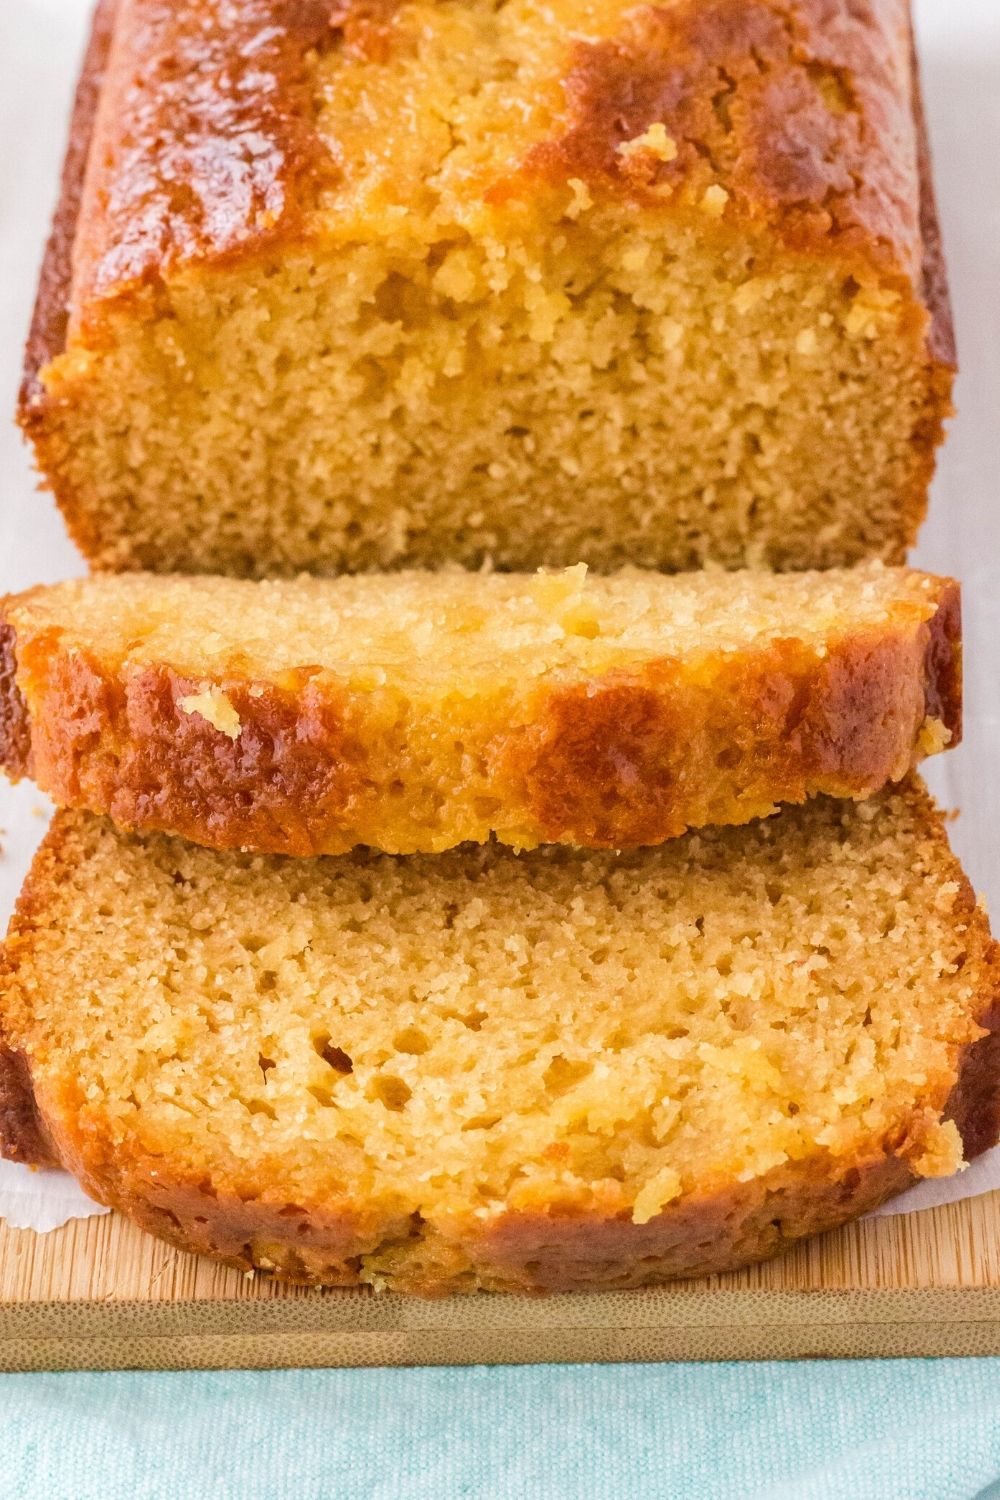 close-up view of sliced old-fashioned golden syrup loaf cake